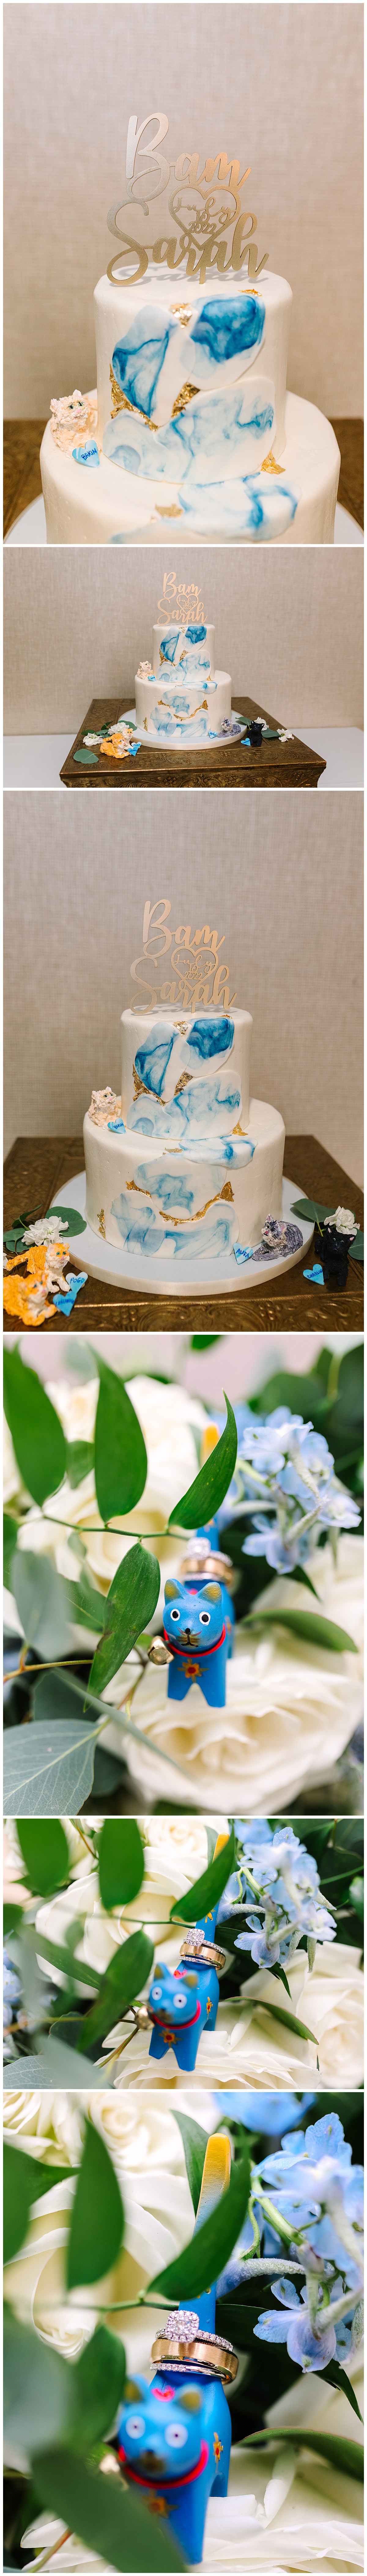 Colorful blue wedding cake and blue cat wedding detail for an Ocean One Resort and Spa wedding in Atlantic Beach, Florida captured by Laura Perez Photography, a Florida Wedding Photographer.